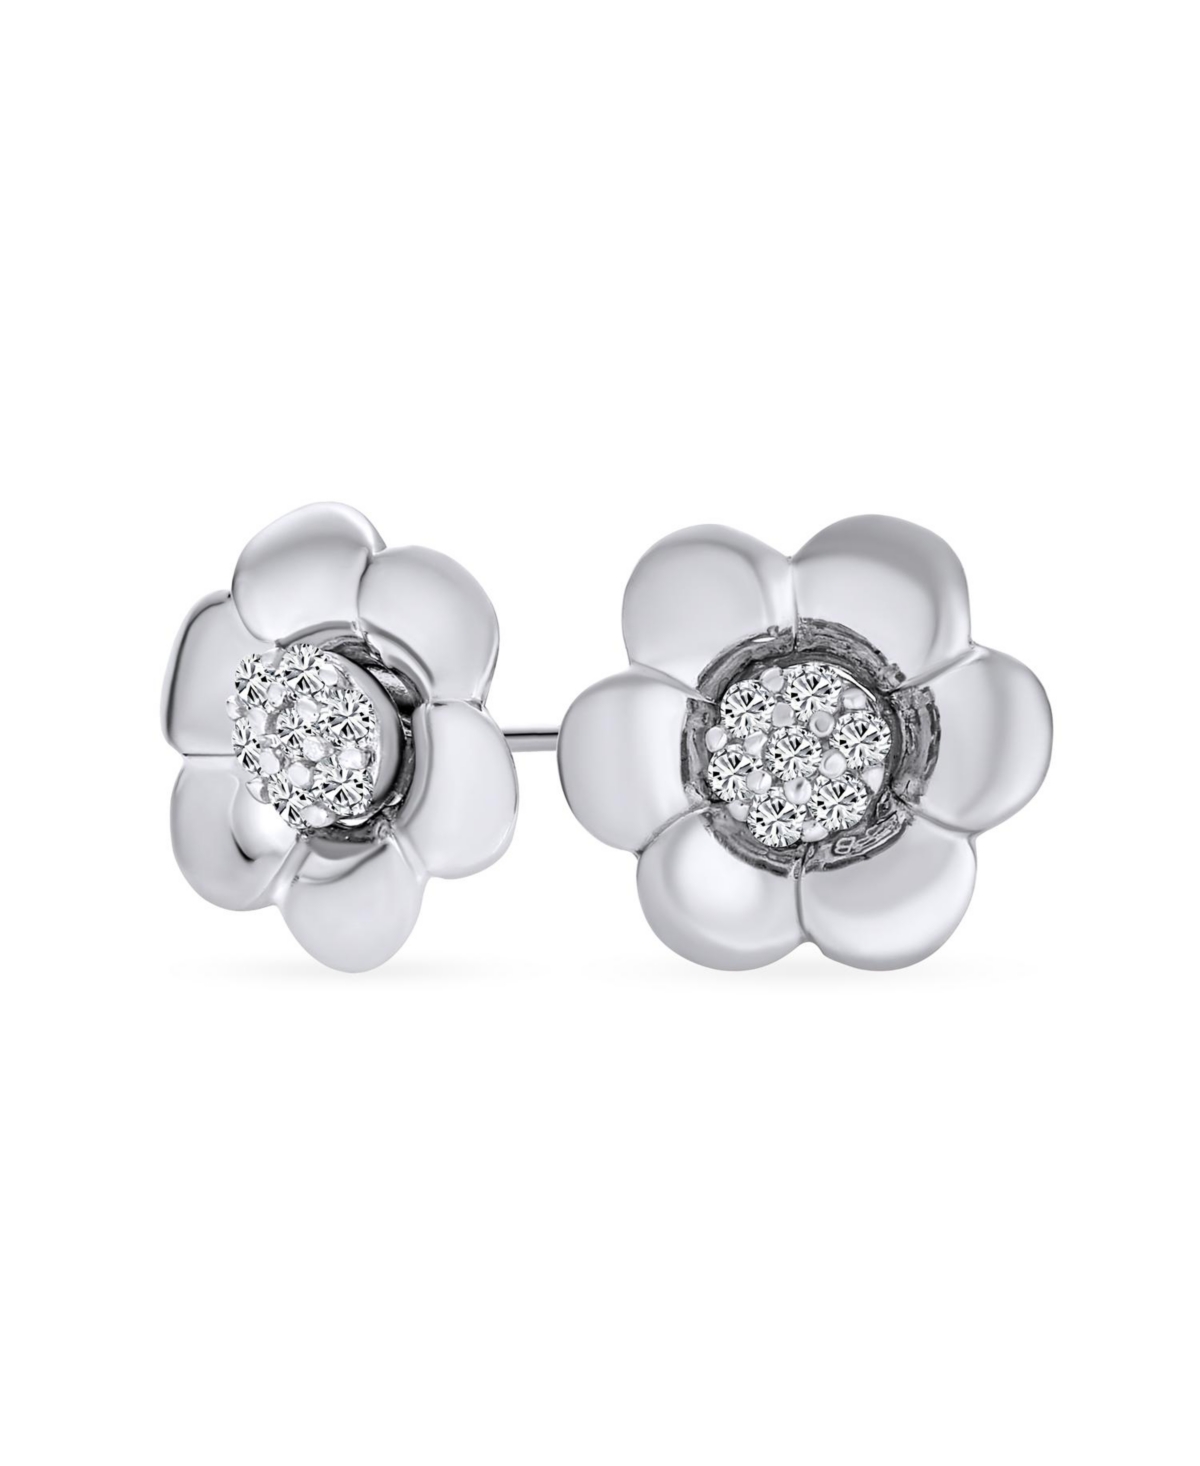 2 In 1 Removable Jackets Simple Danity Pave Cz Stud Center with Petal Flower Jacket Rose Stud Earrings For Women Teen .925 Sterling Silver - Silver